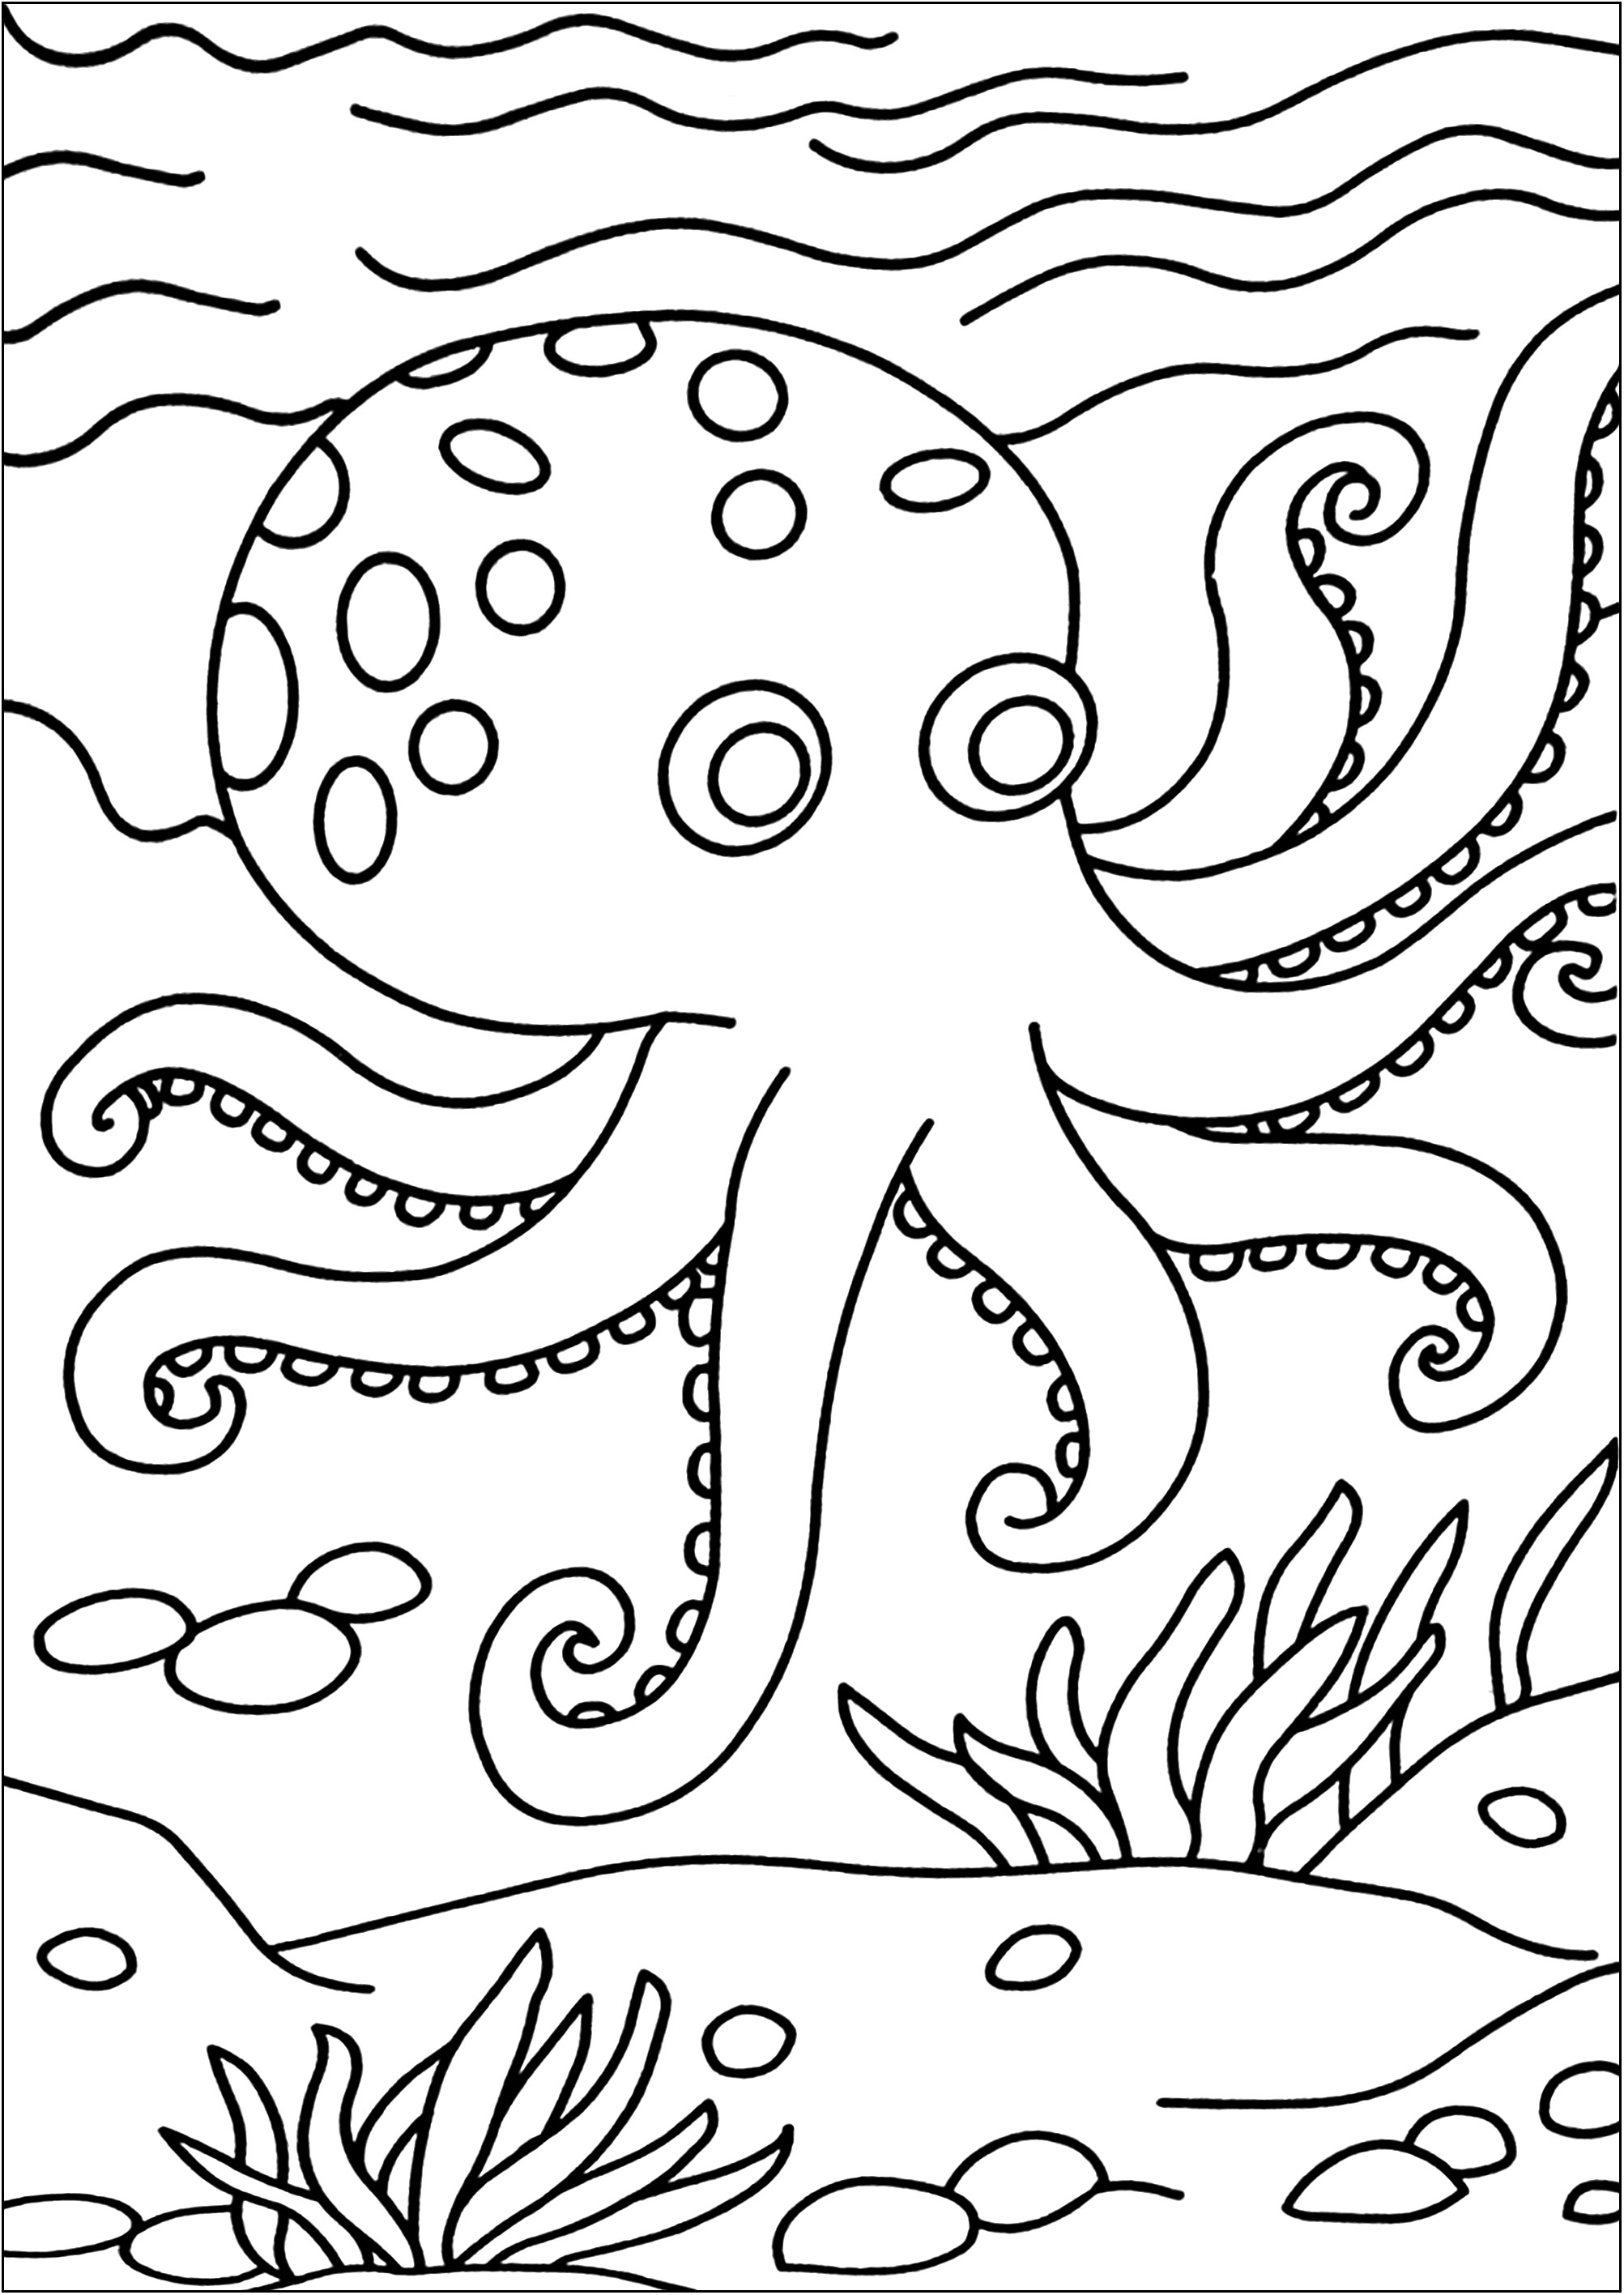 Simple Octopuses coloring page for children